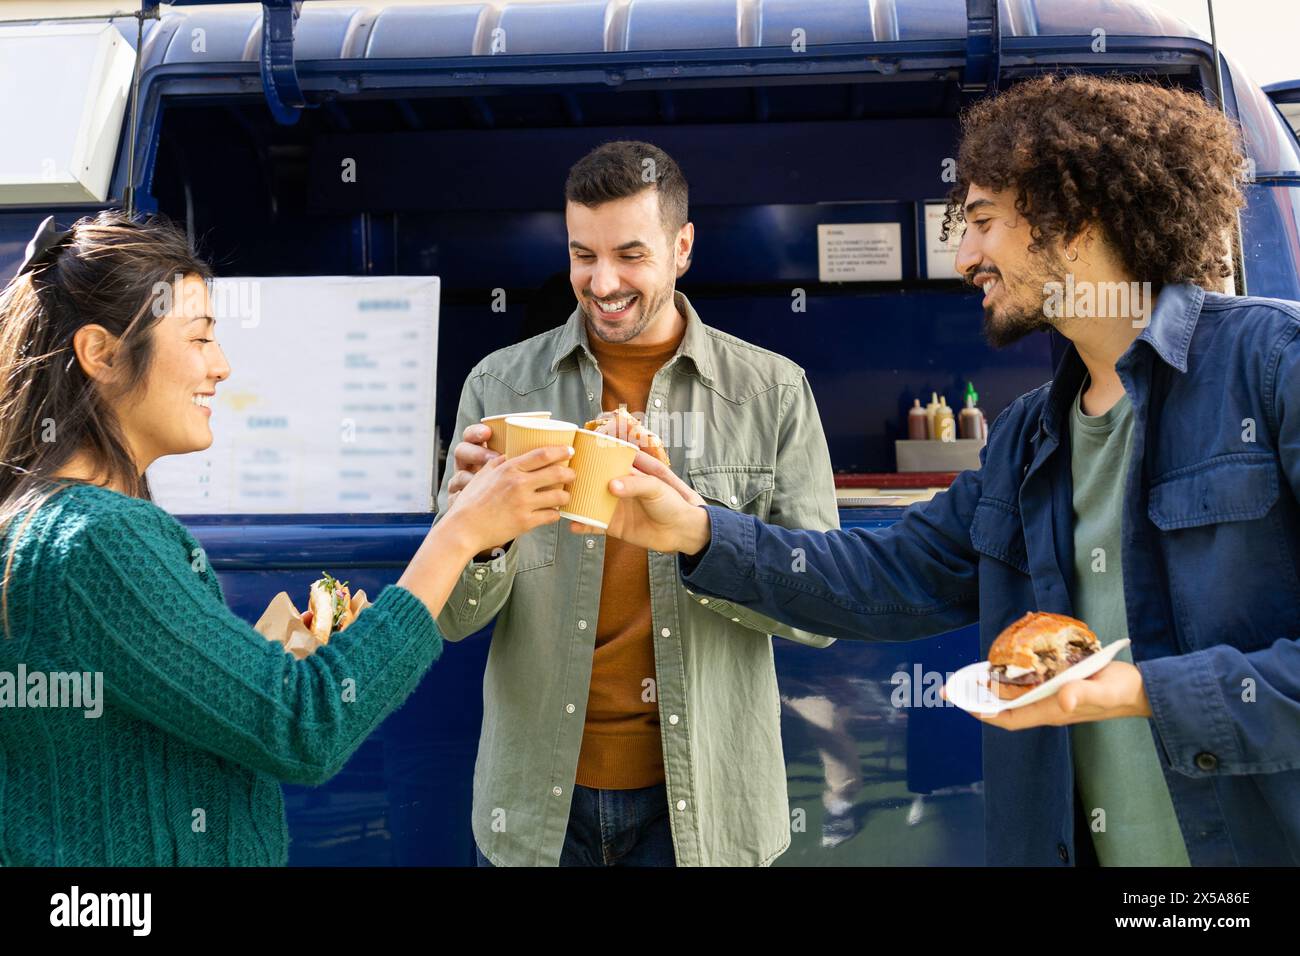 Three friends enjoy a sunny day, laughing and sharing street food near a vibrant blue food truck Stock Photo